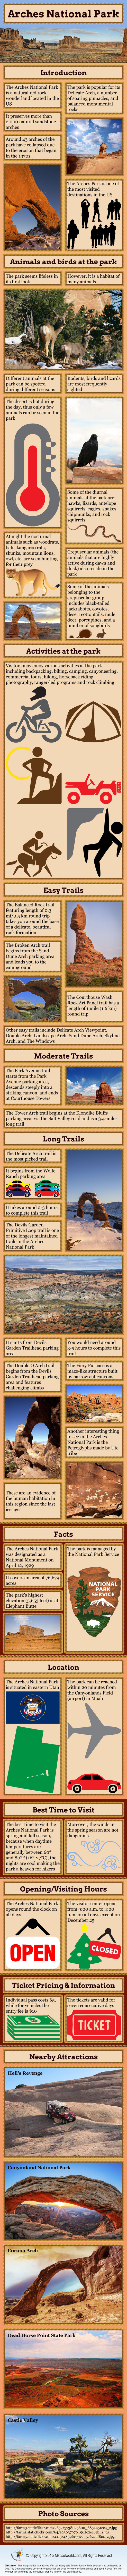 Arches National Park Infographic